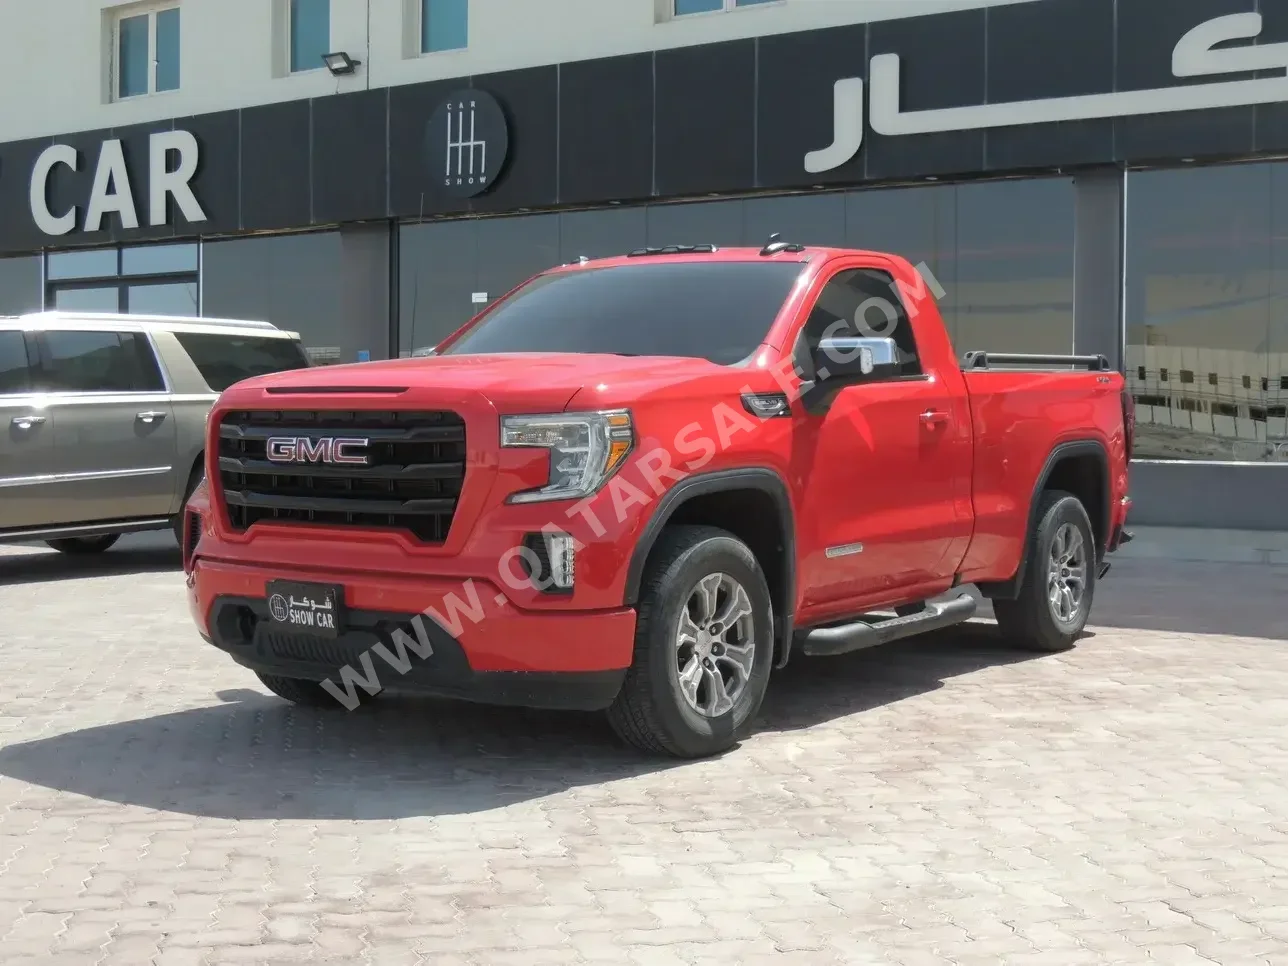 GMC  Sierra  Elevation  2020  Automatic  119,000 Km  8 Cylinder  Four Wheel Drive (4WD)  Pick Up  Red